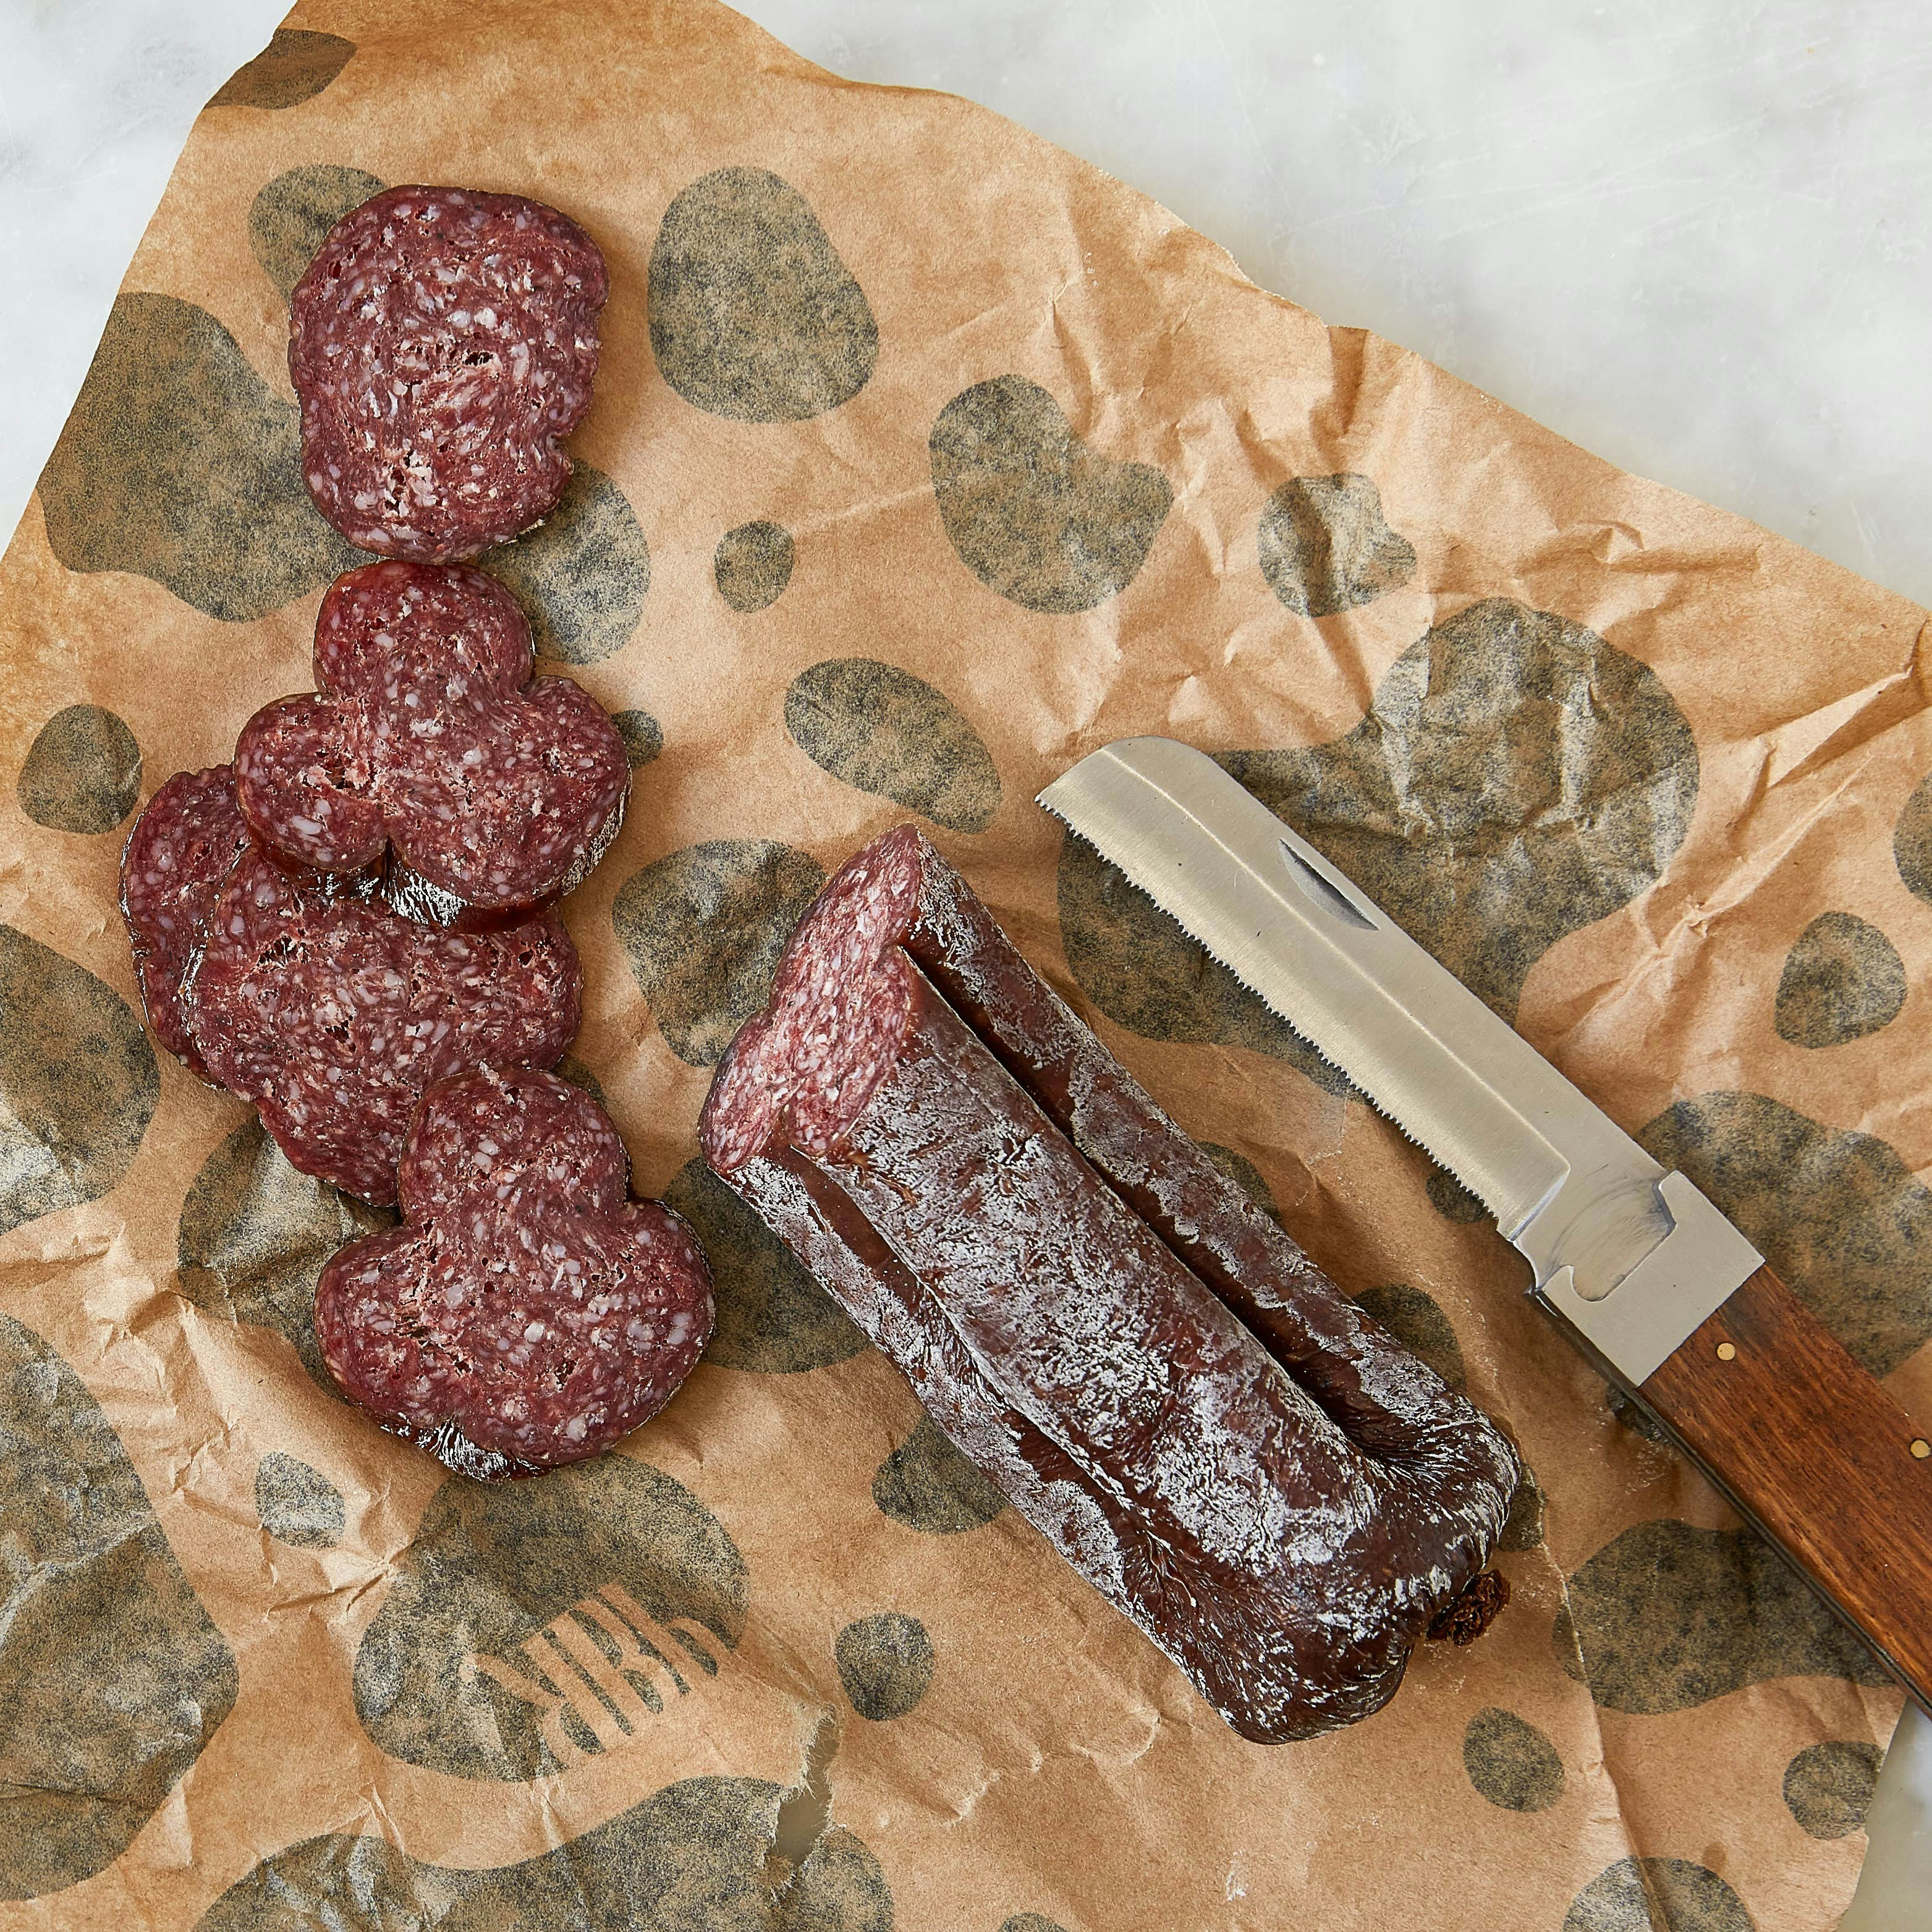 red bear tipsy cow beef brandy salami meats